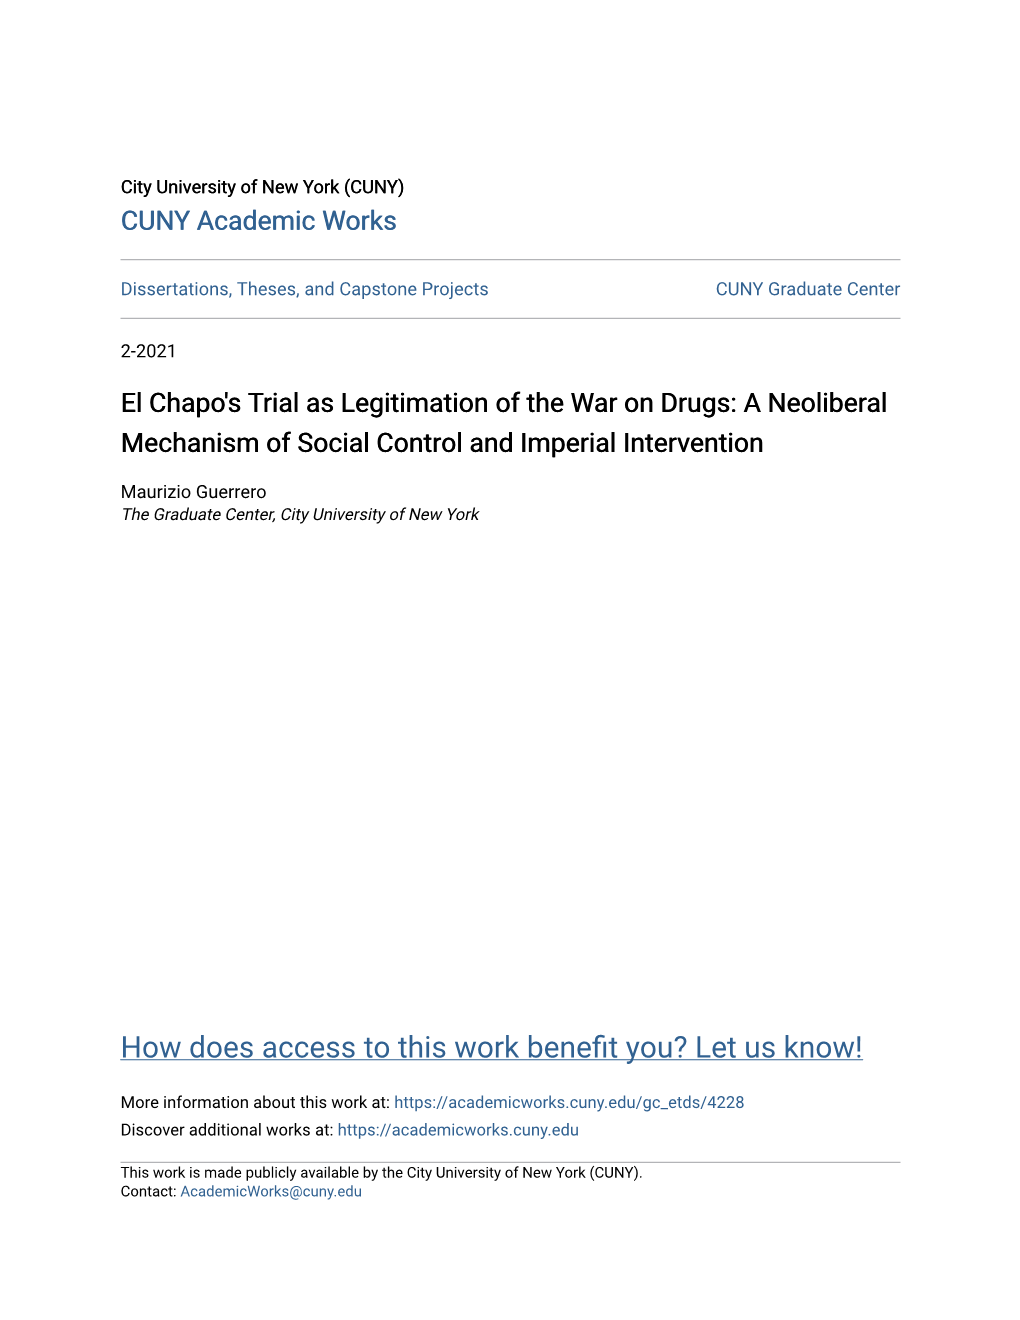 El Chapo's Trial As Legitimation of the War on Drugs: a Neoliberal Mechanism of Social Control and Imperial Intervention